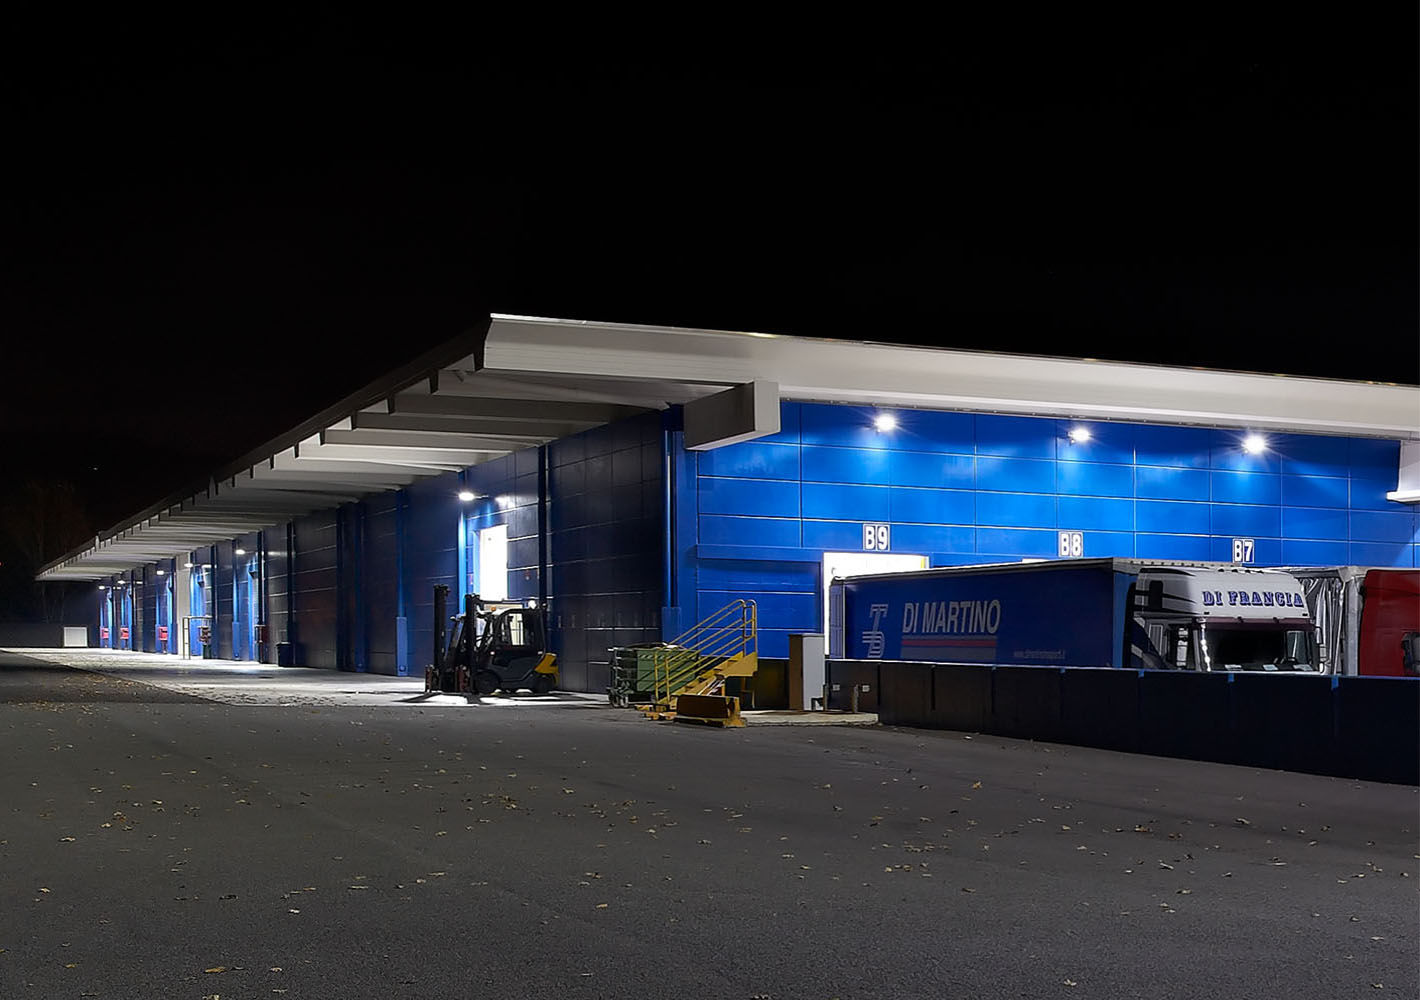 Security perimeter lighting for logistic centres